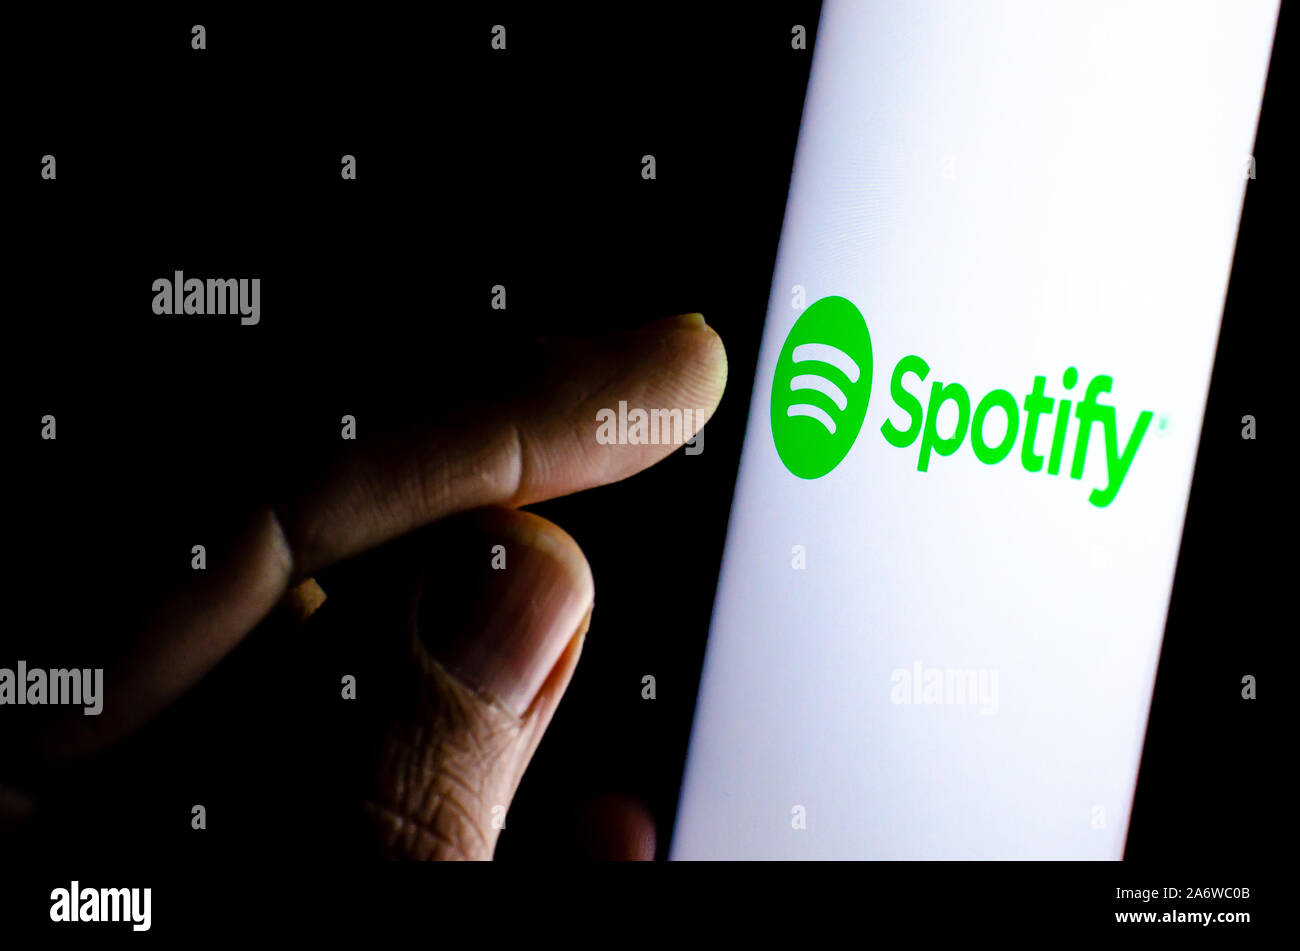 Spotify logo on a smartphone screen in a dark room and a finger touching it. Stock Photo